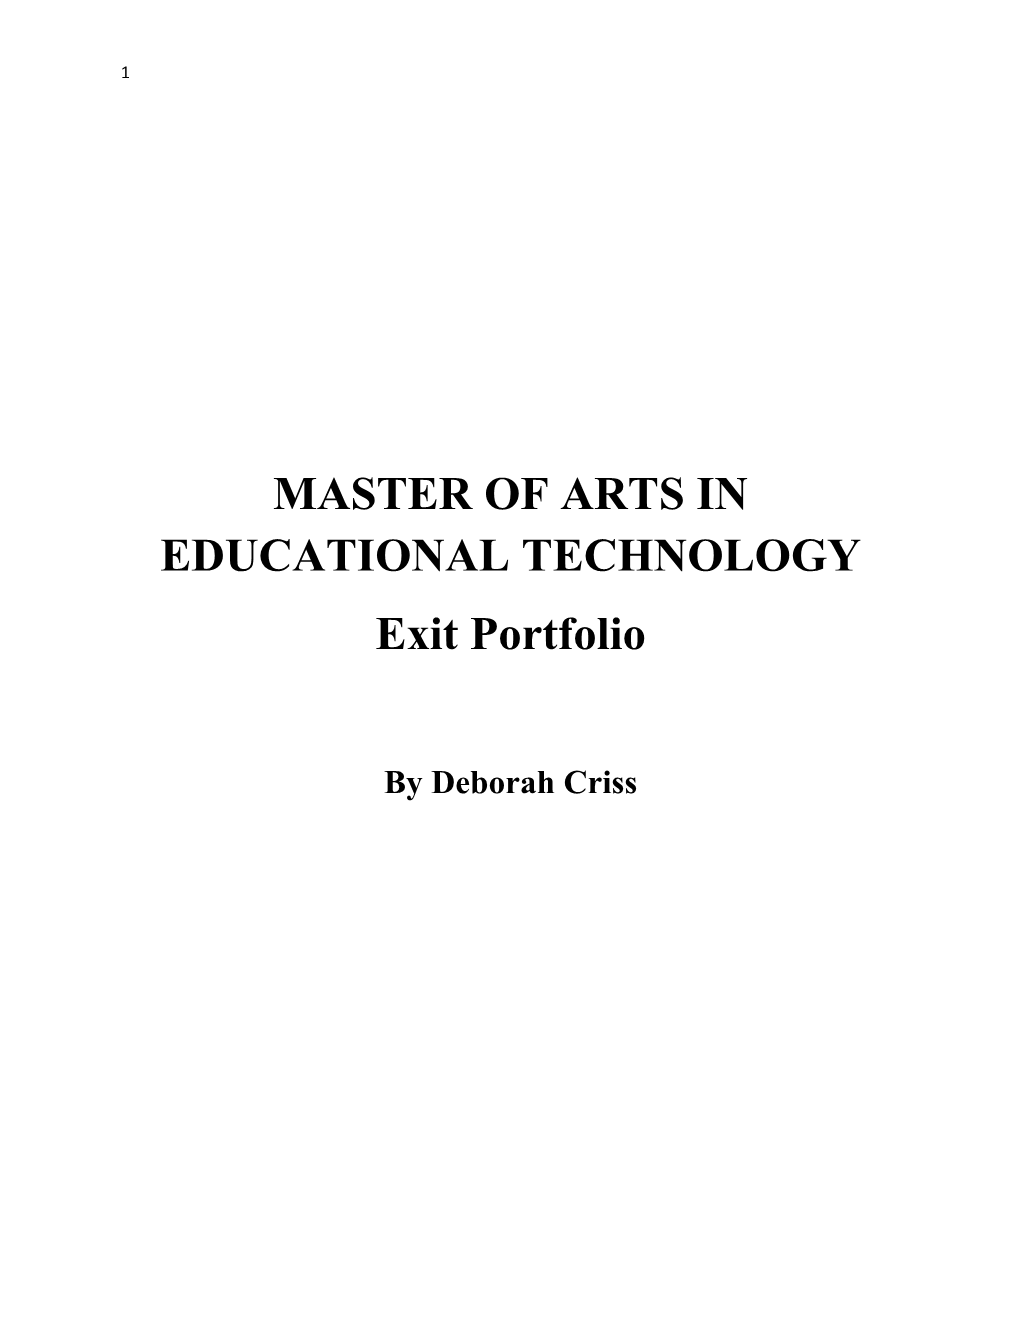 Master of Arts in Educational Technology